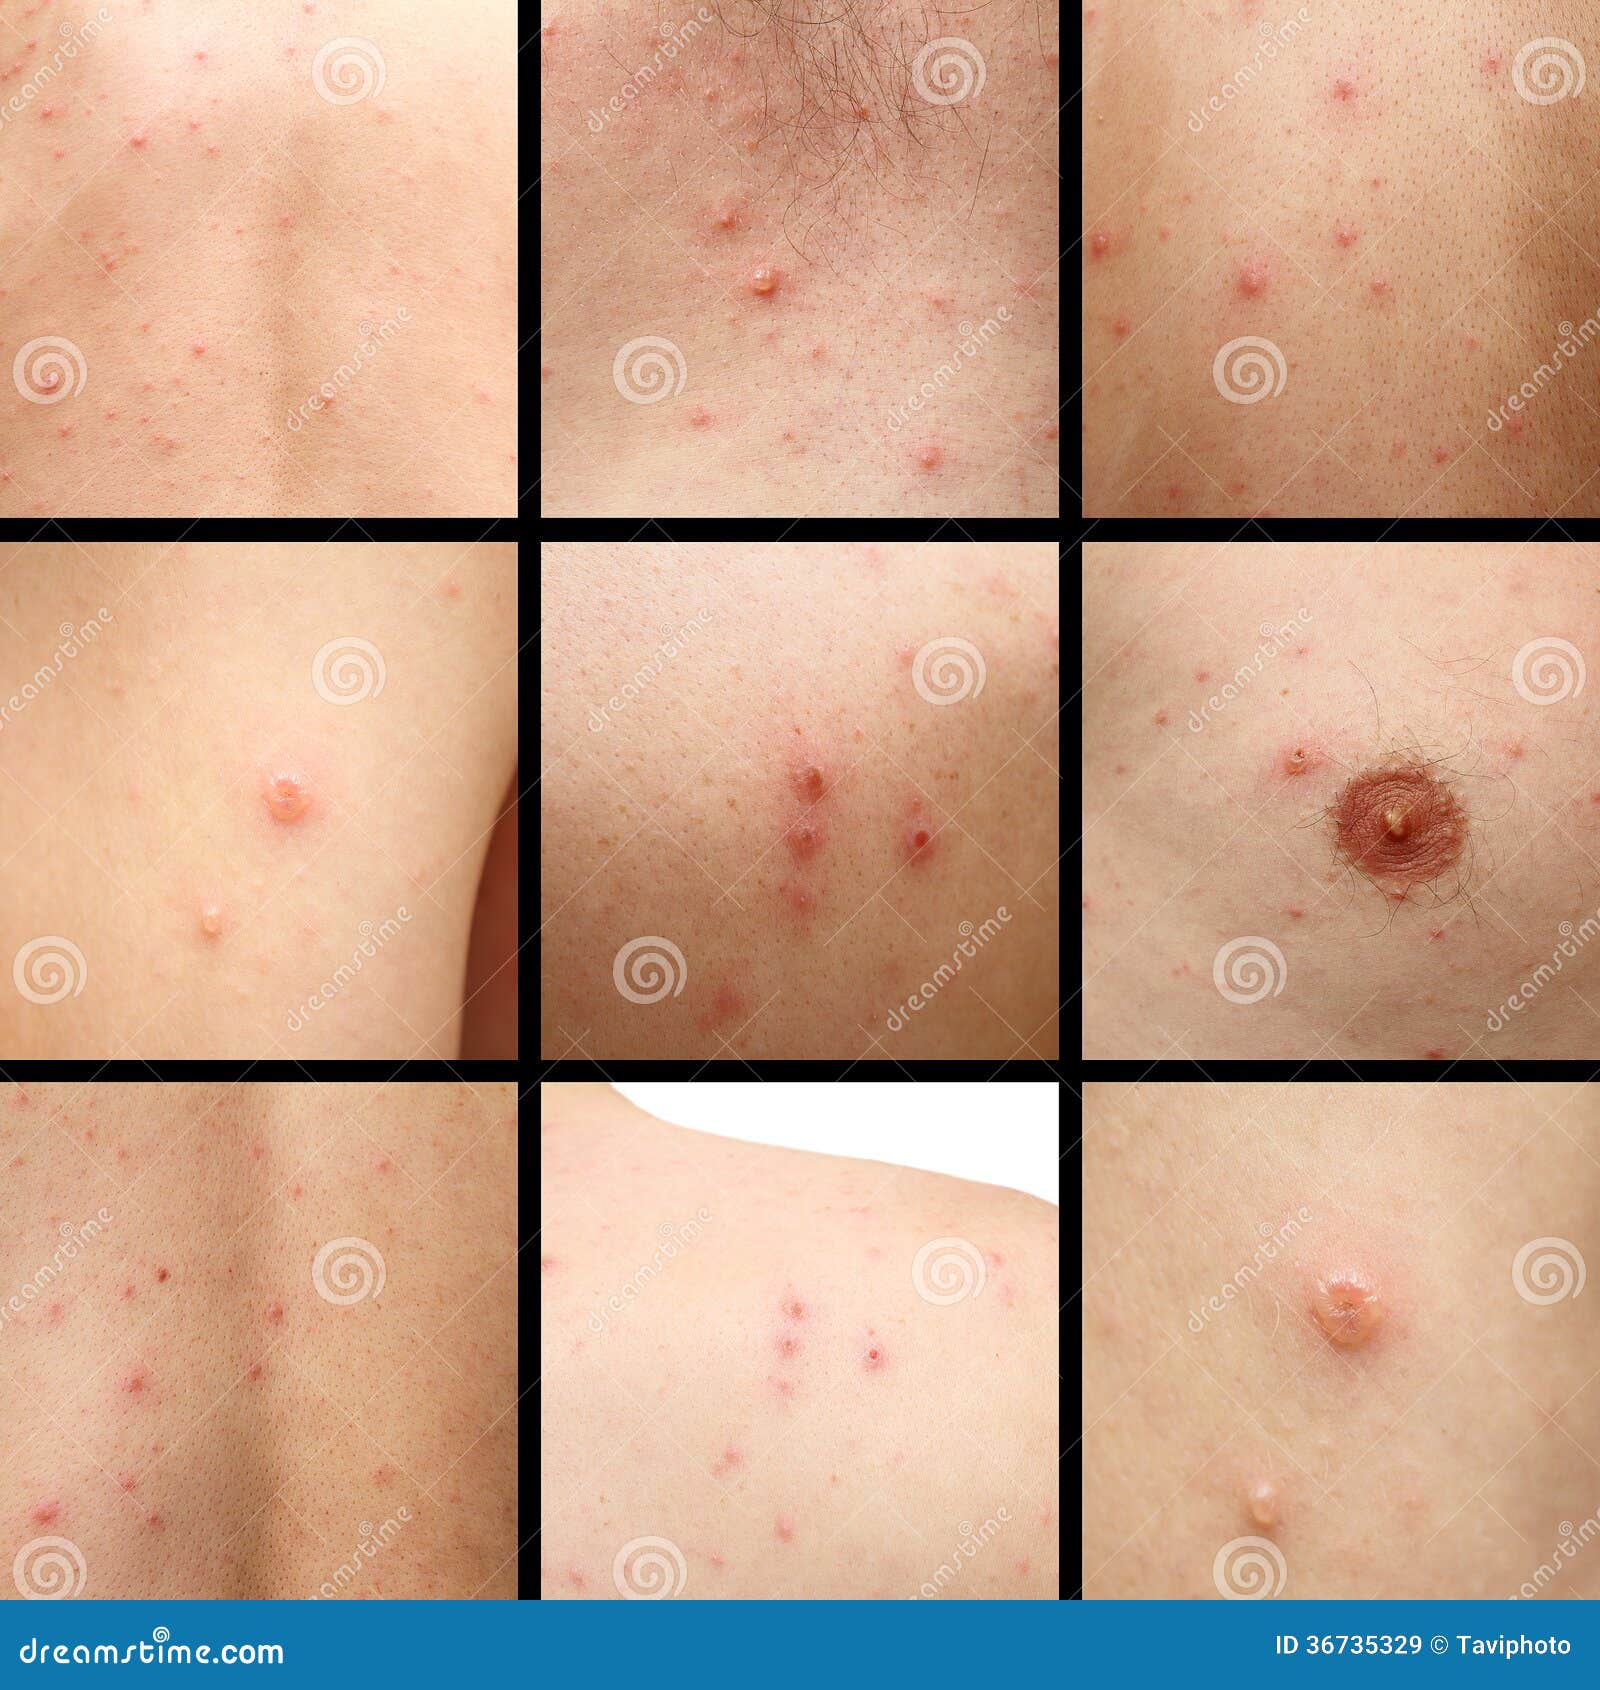 pictures of shingles on the face #9